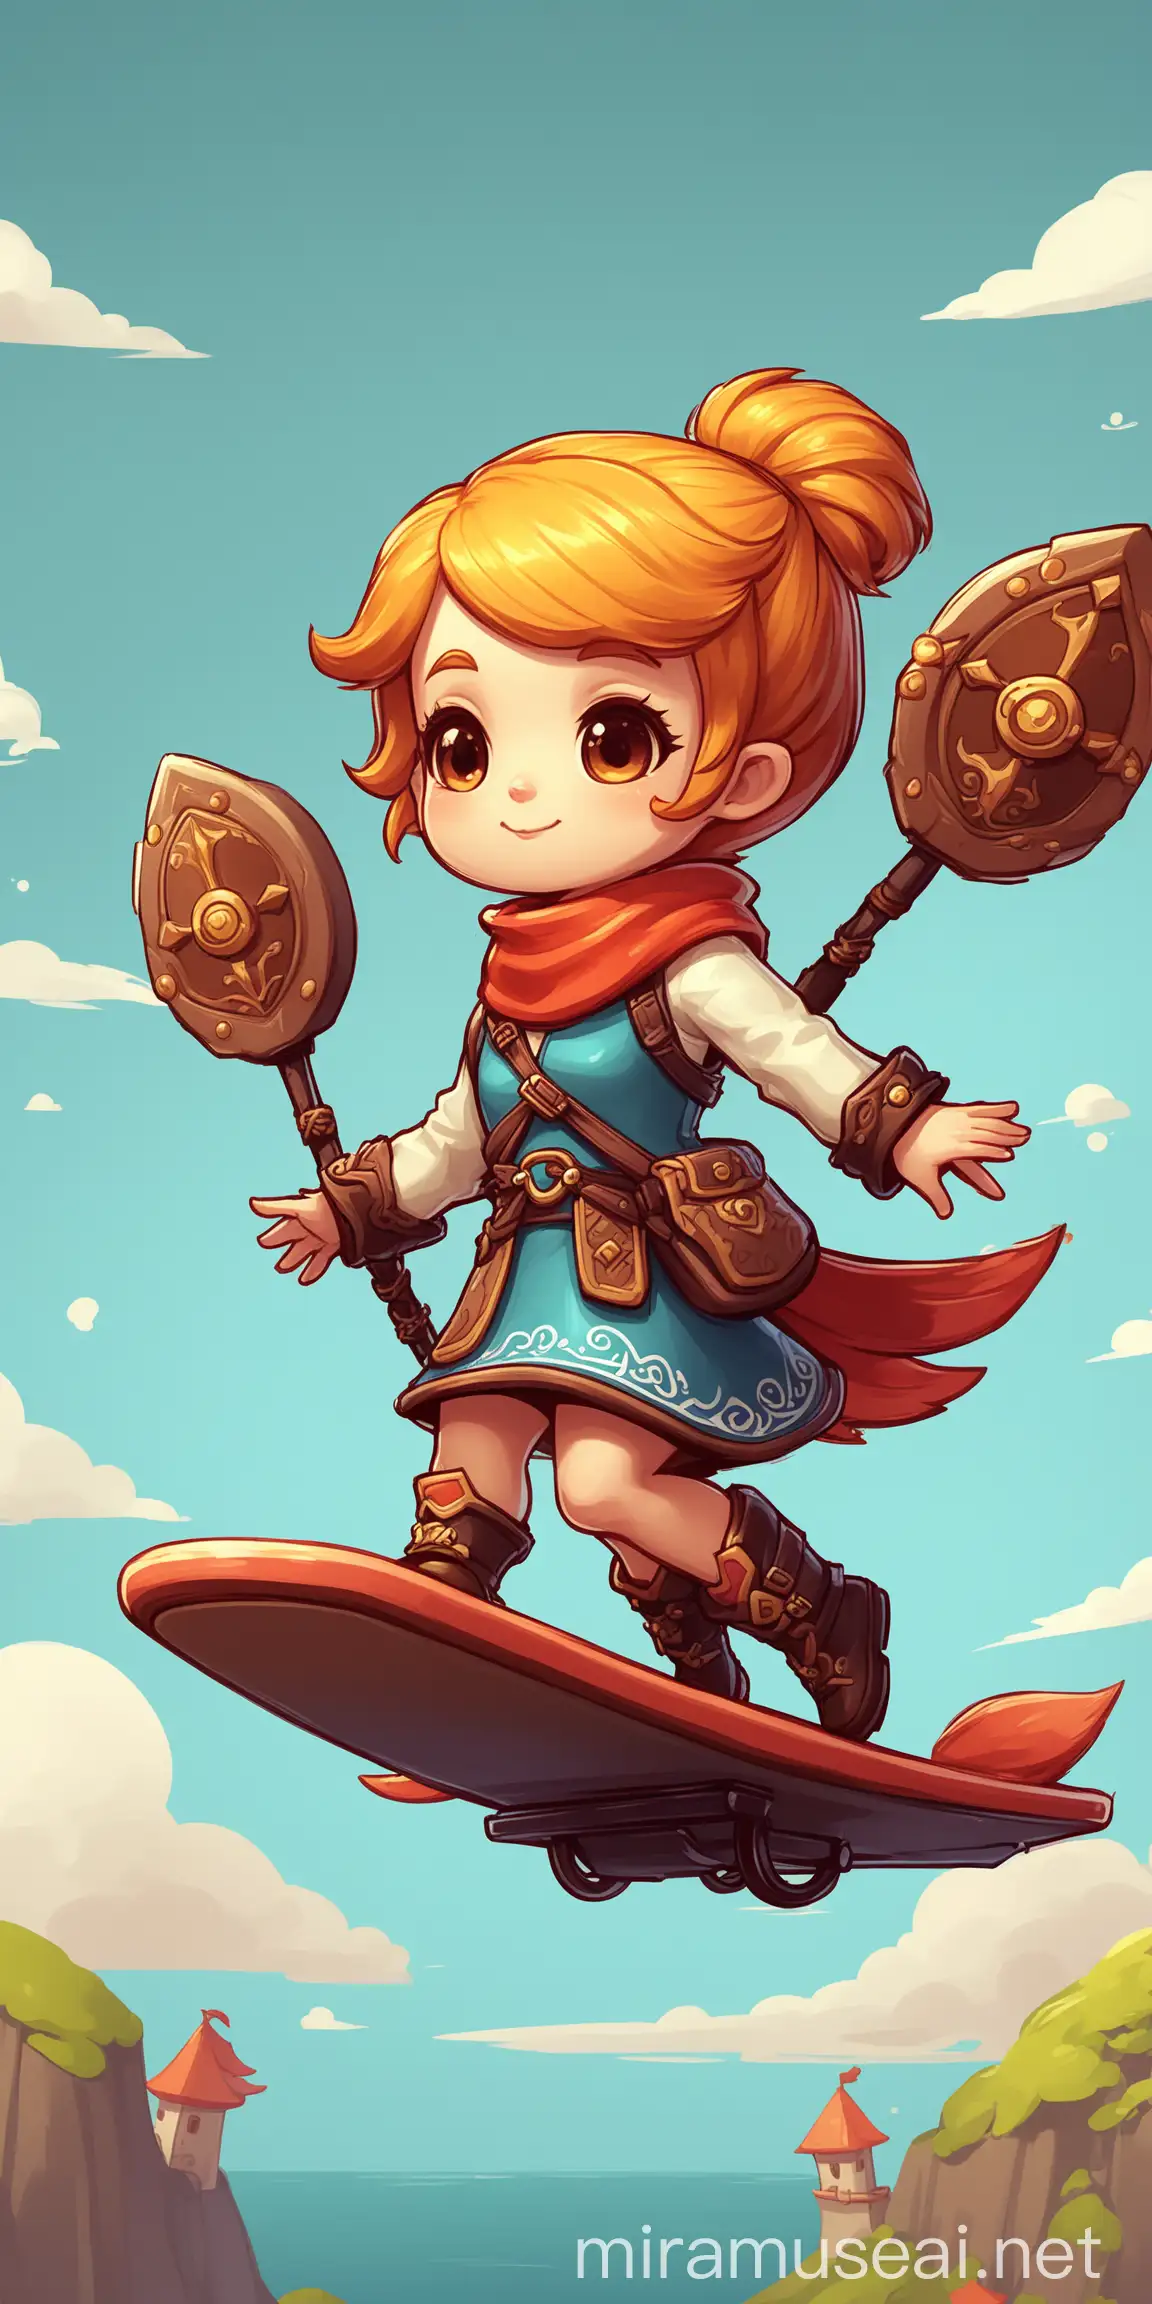 stylized, cute rpg character, on flying board, for thumbnail